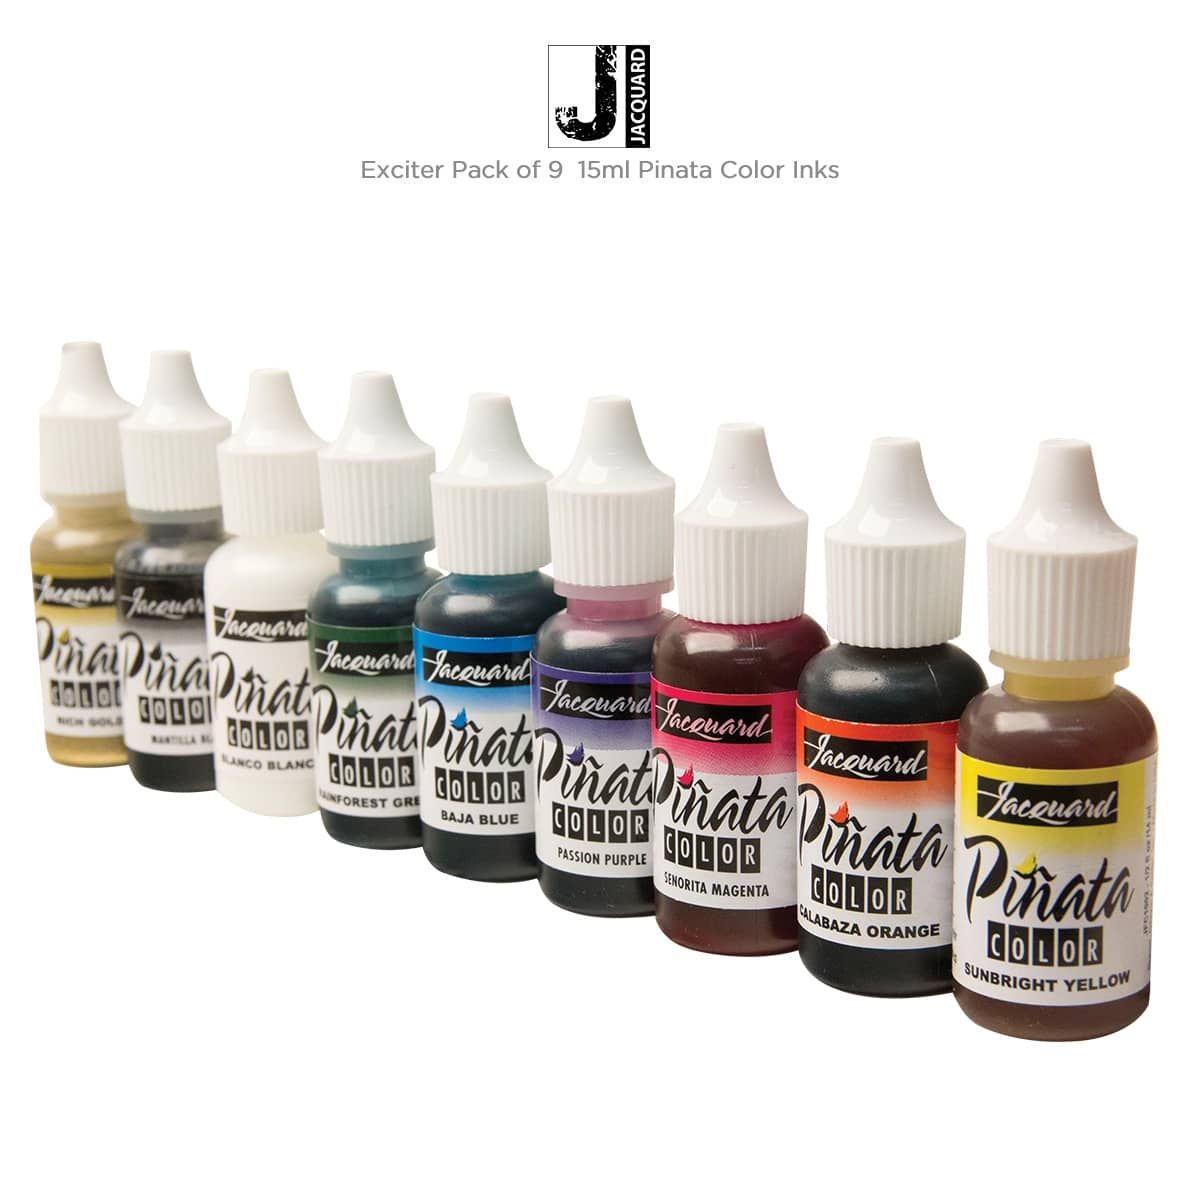 Pack of 9 15ml bottles of Pinata Color Ink